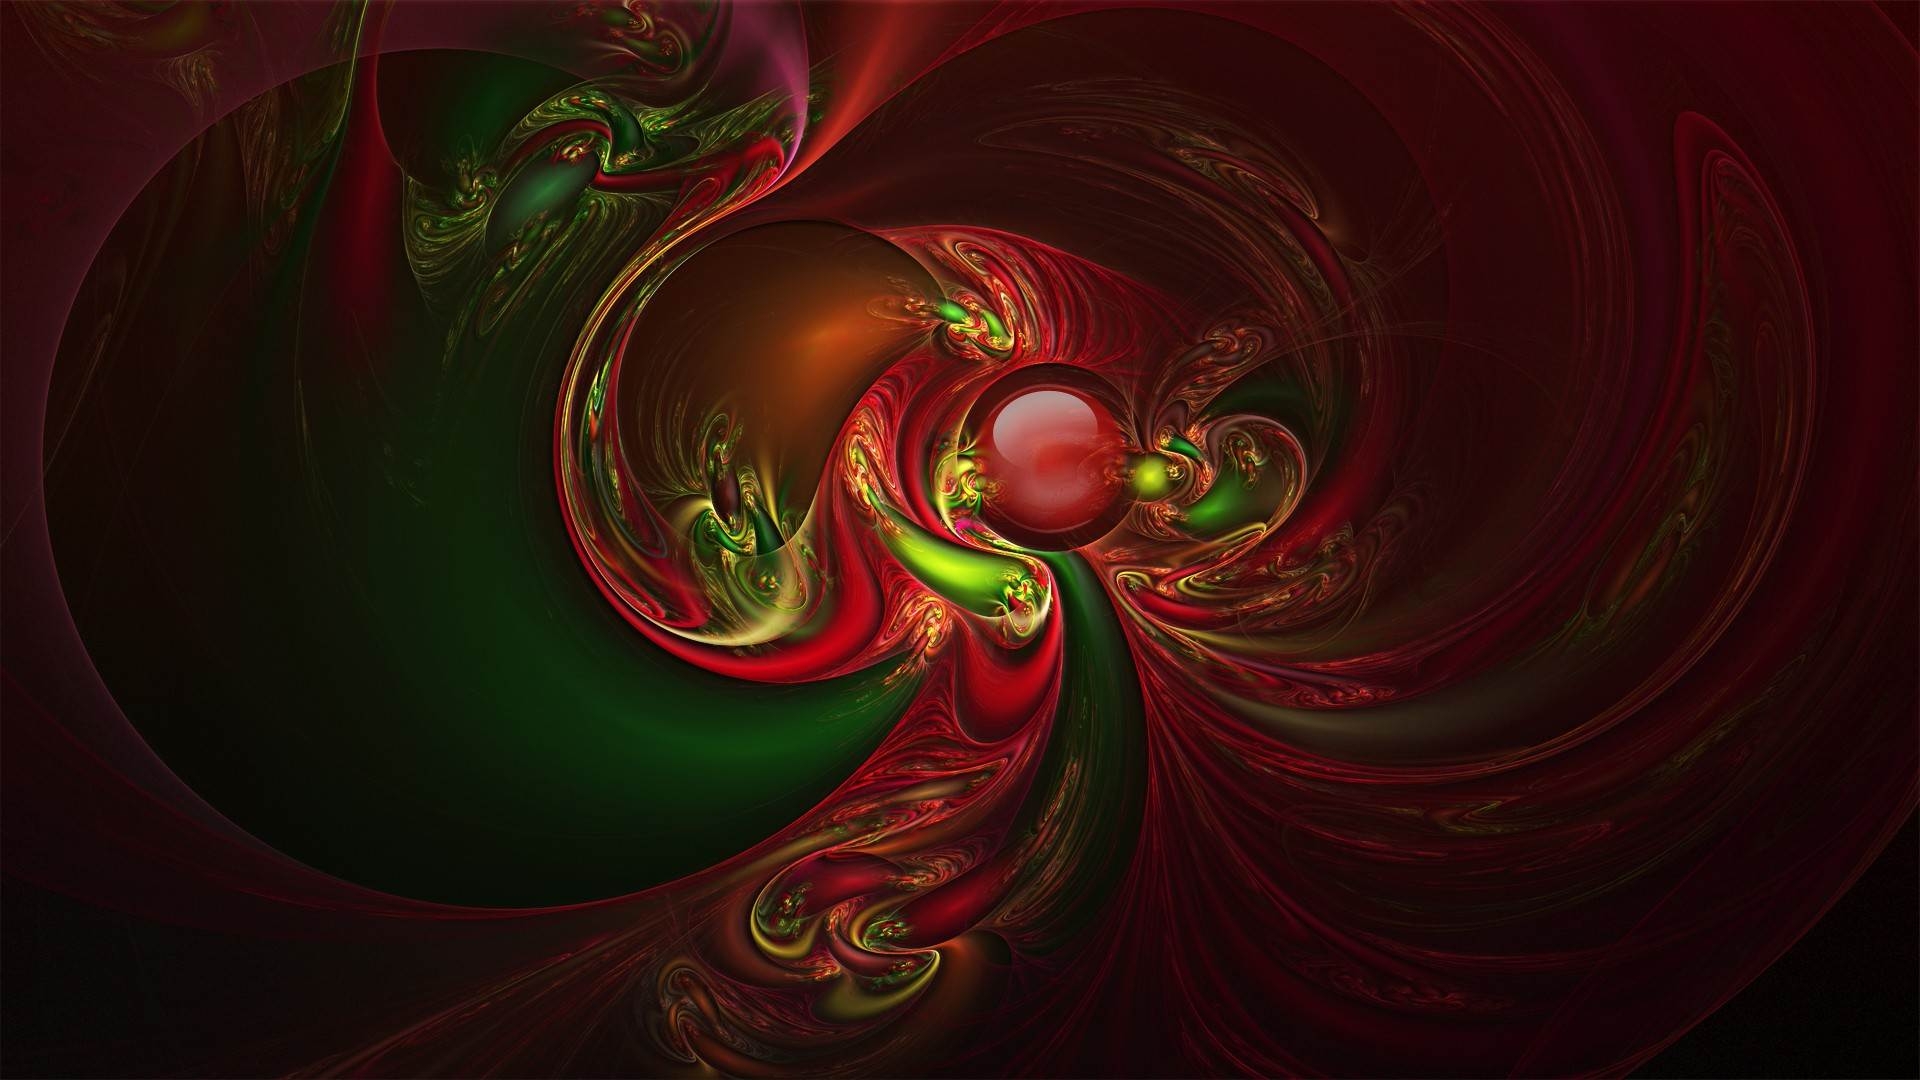 Wallpaper Colors Dark Abstract Definition HD